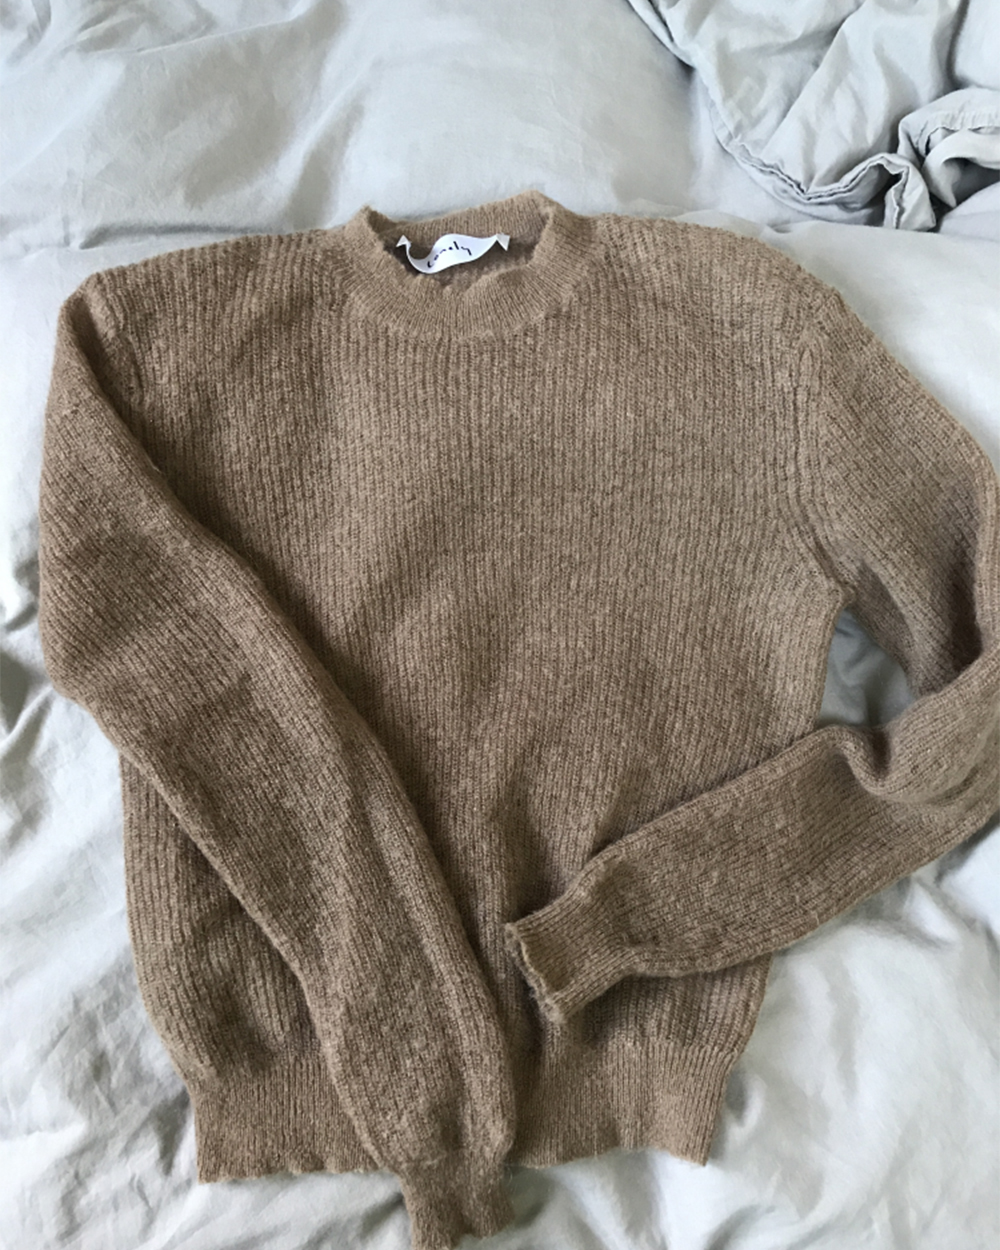 Lonely jumper, $150